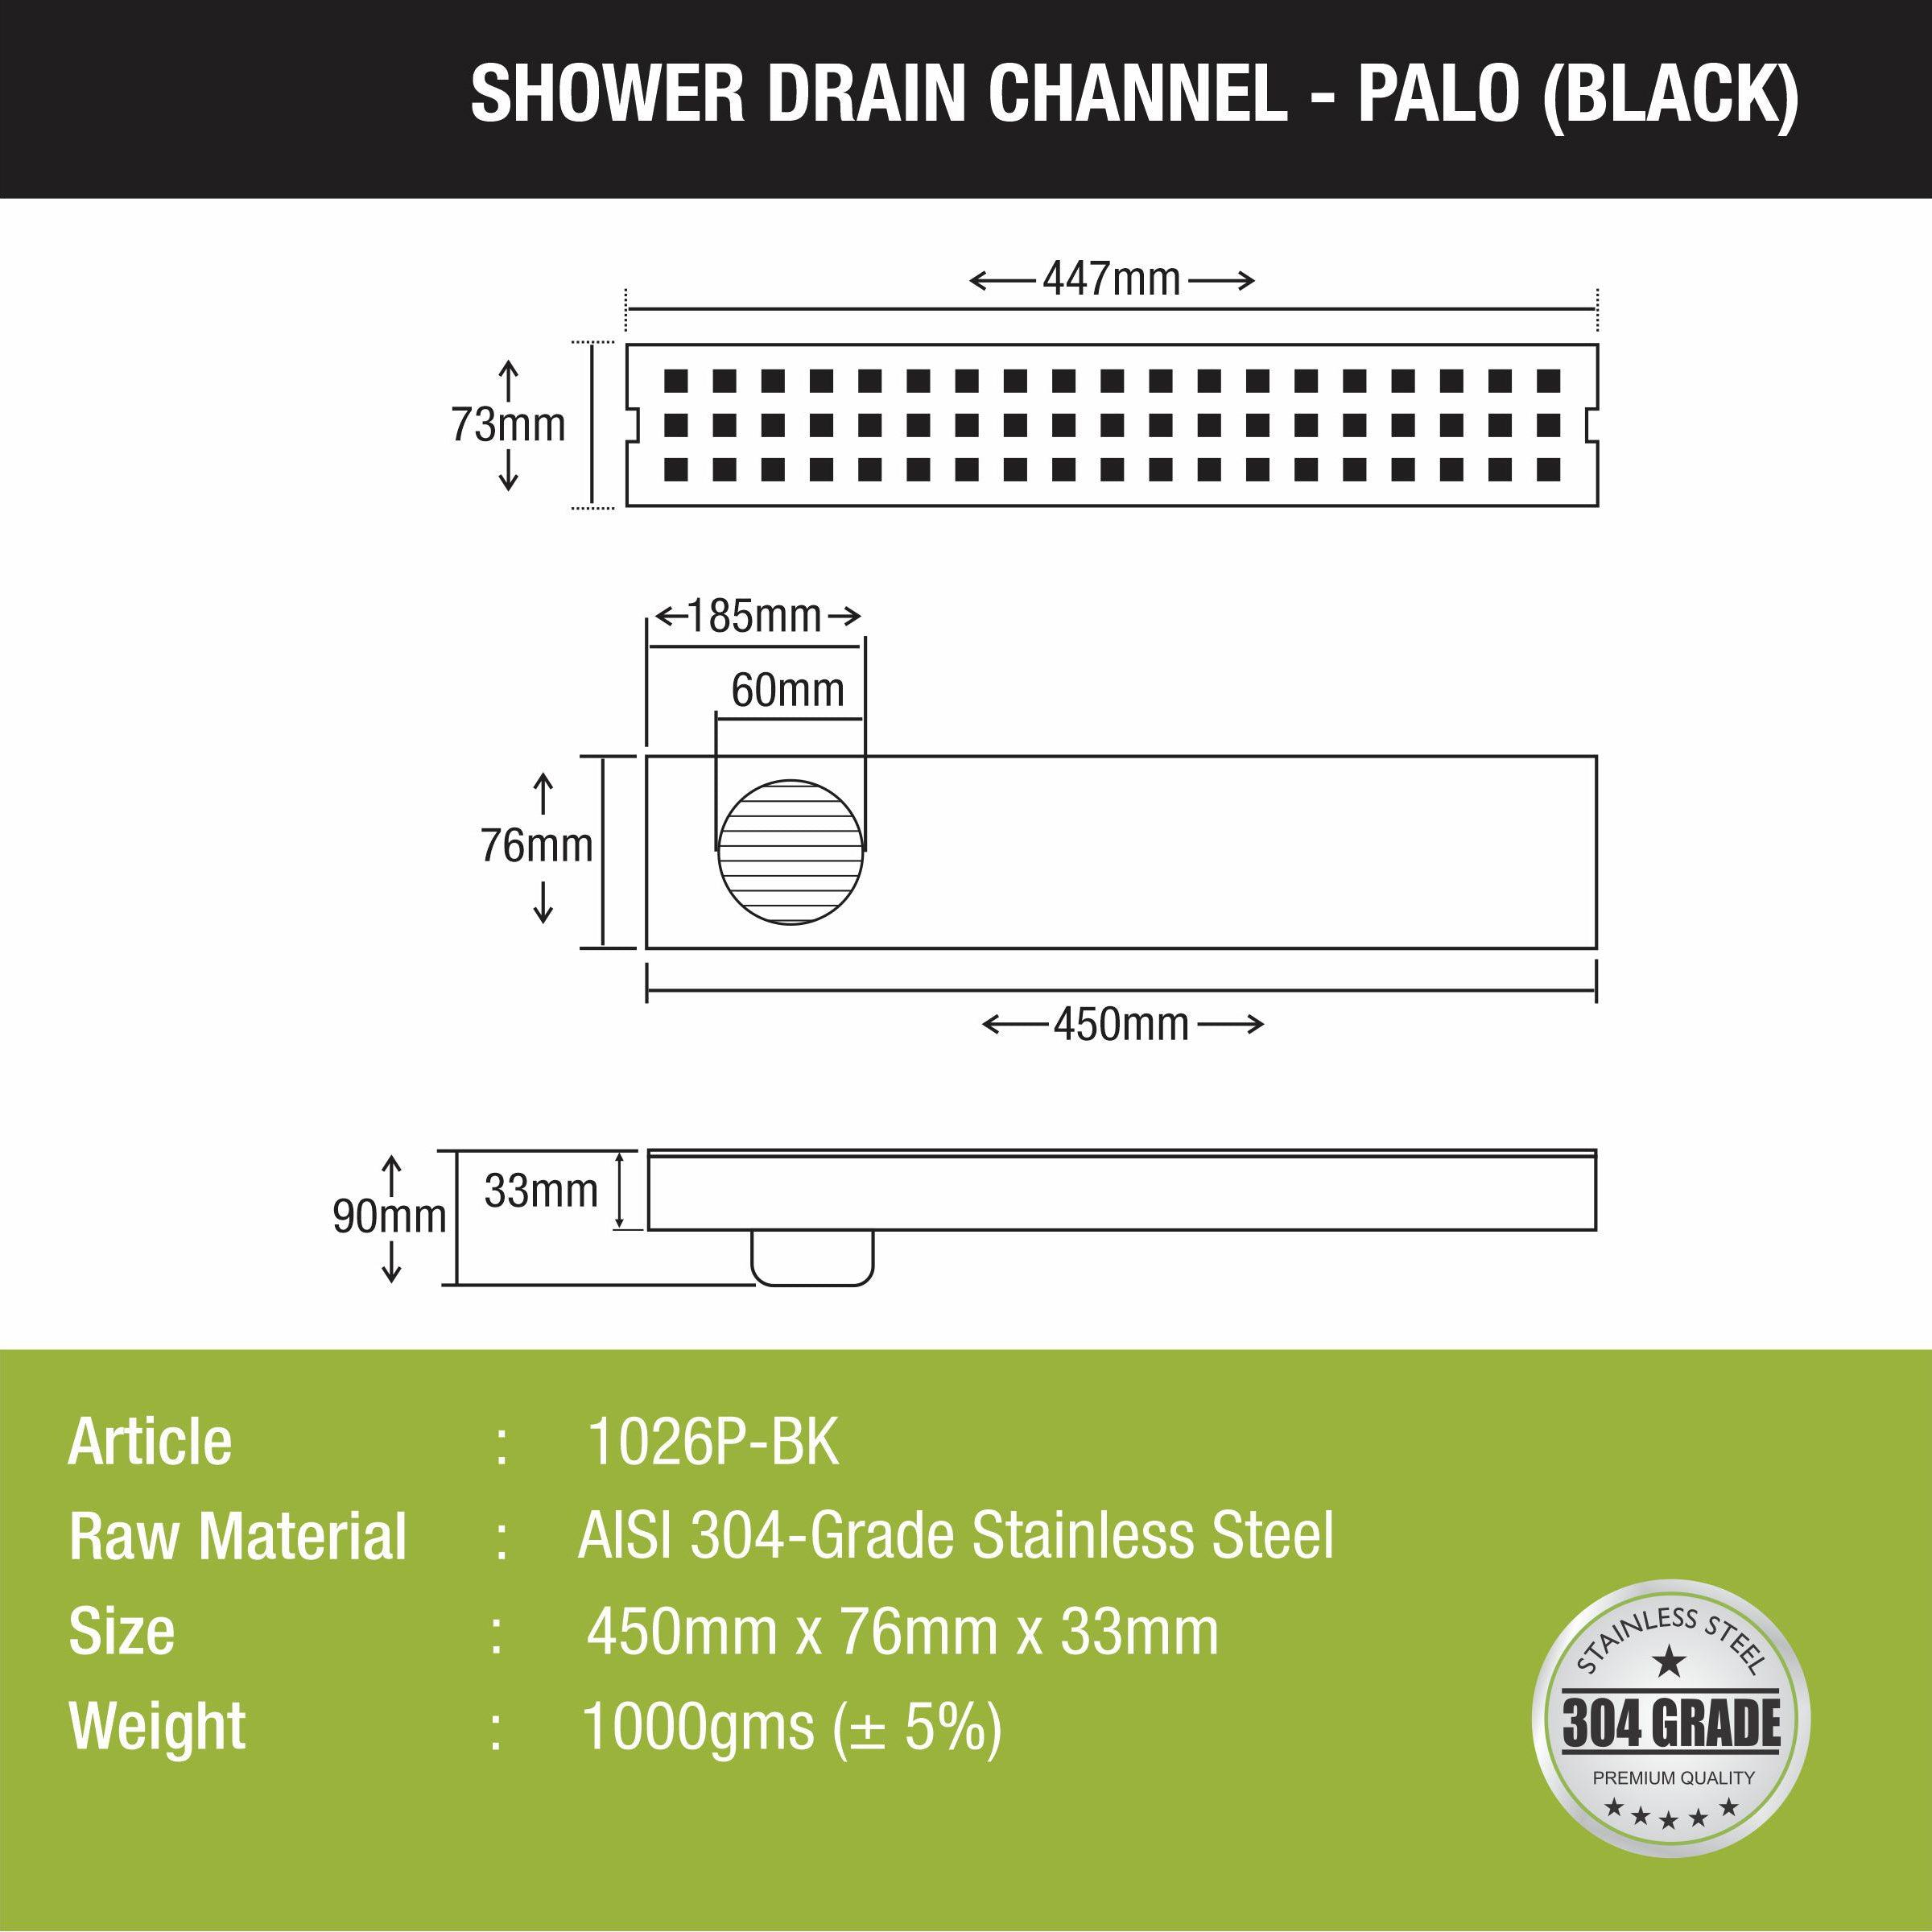 Palo Shower Drain Channel -Black (18 x 3 Inches) size and measurement